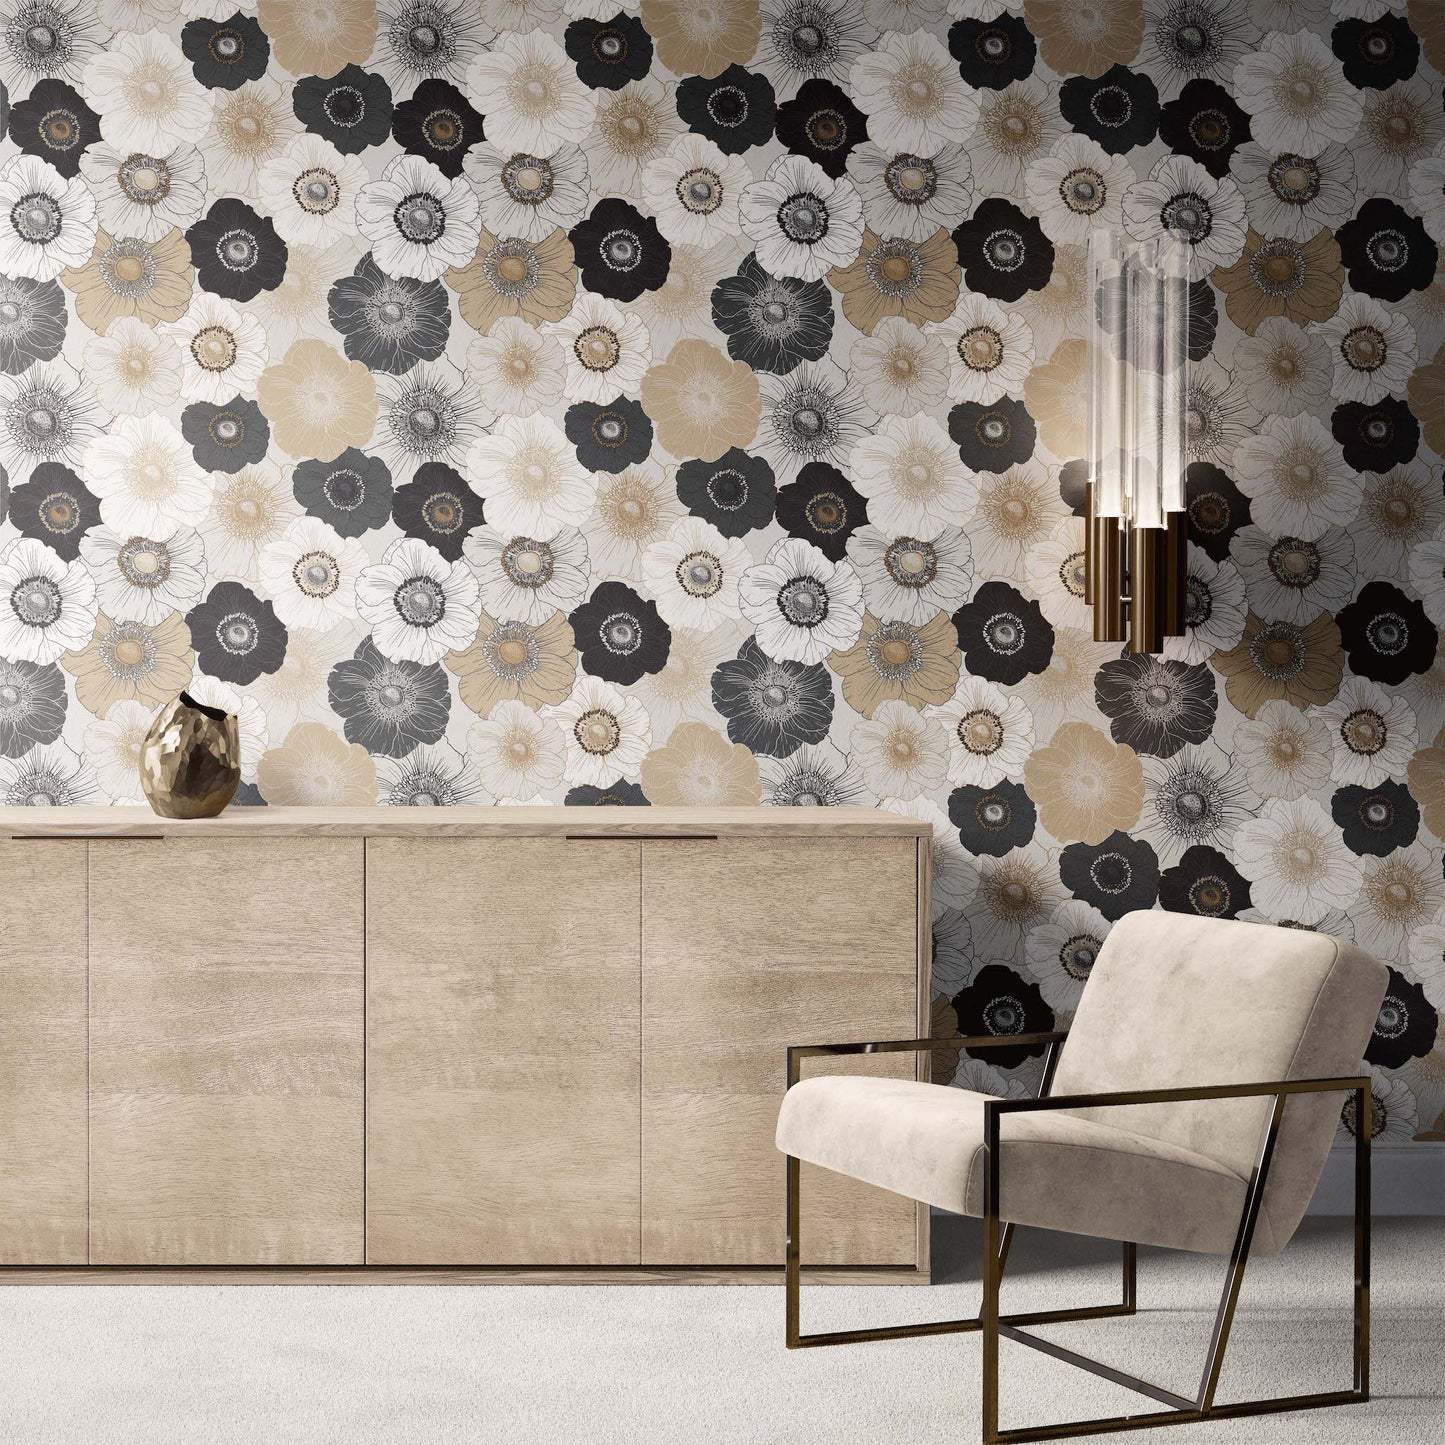 Flower Power | Peel and Stick | Fabric Wallpaper